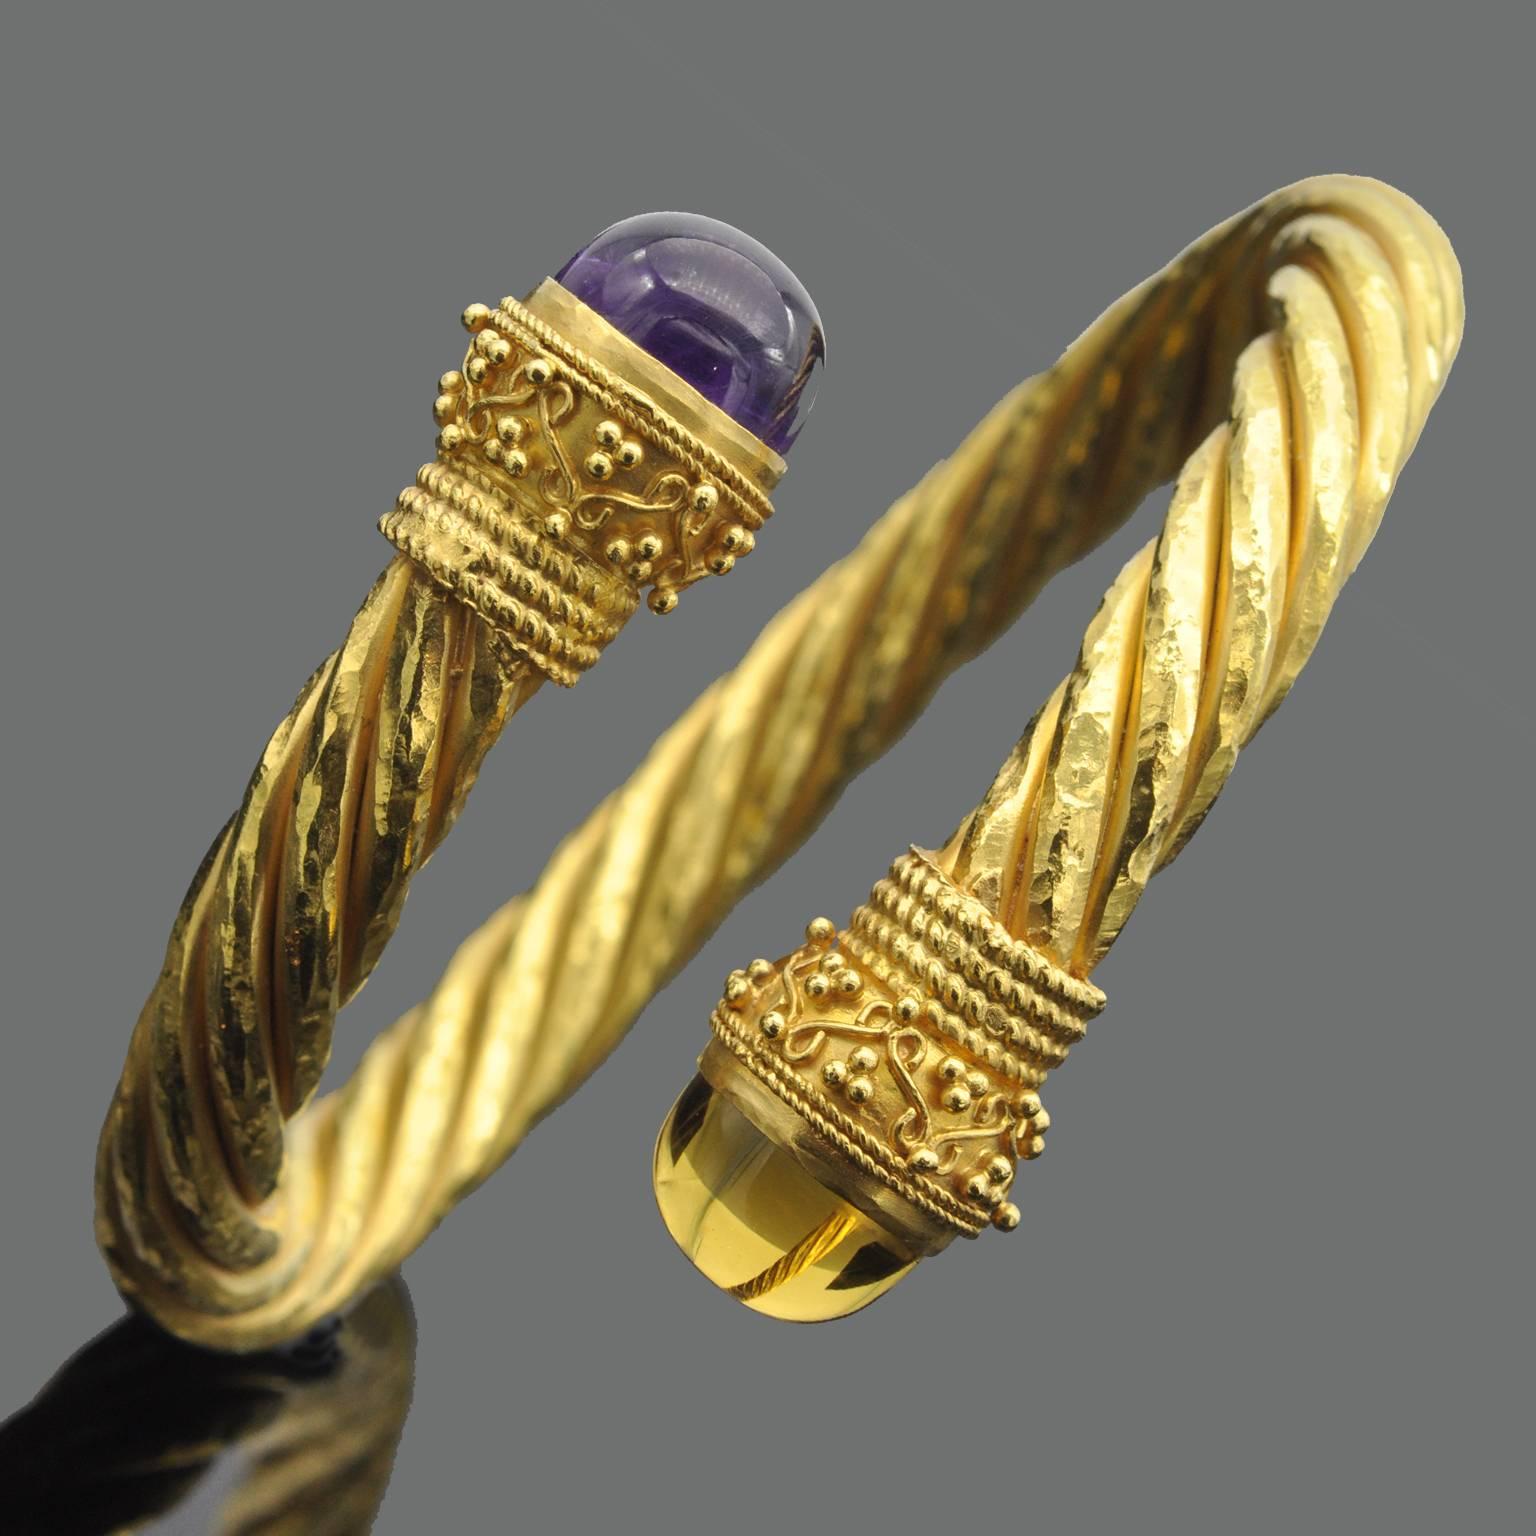 Greek revival even etruscan revival ! hammered gold , twirls, amethyst and citrine cabochon bezel set. Highly desirable bracelet.
You can wear two together ( see ref LU47233574661 )